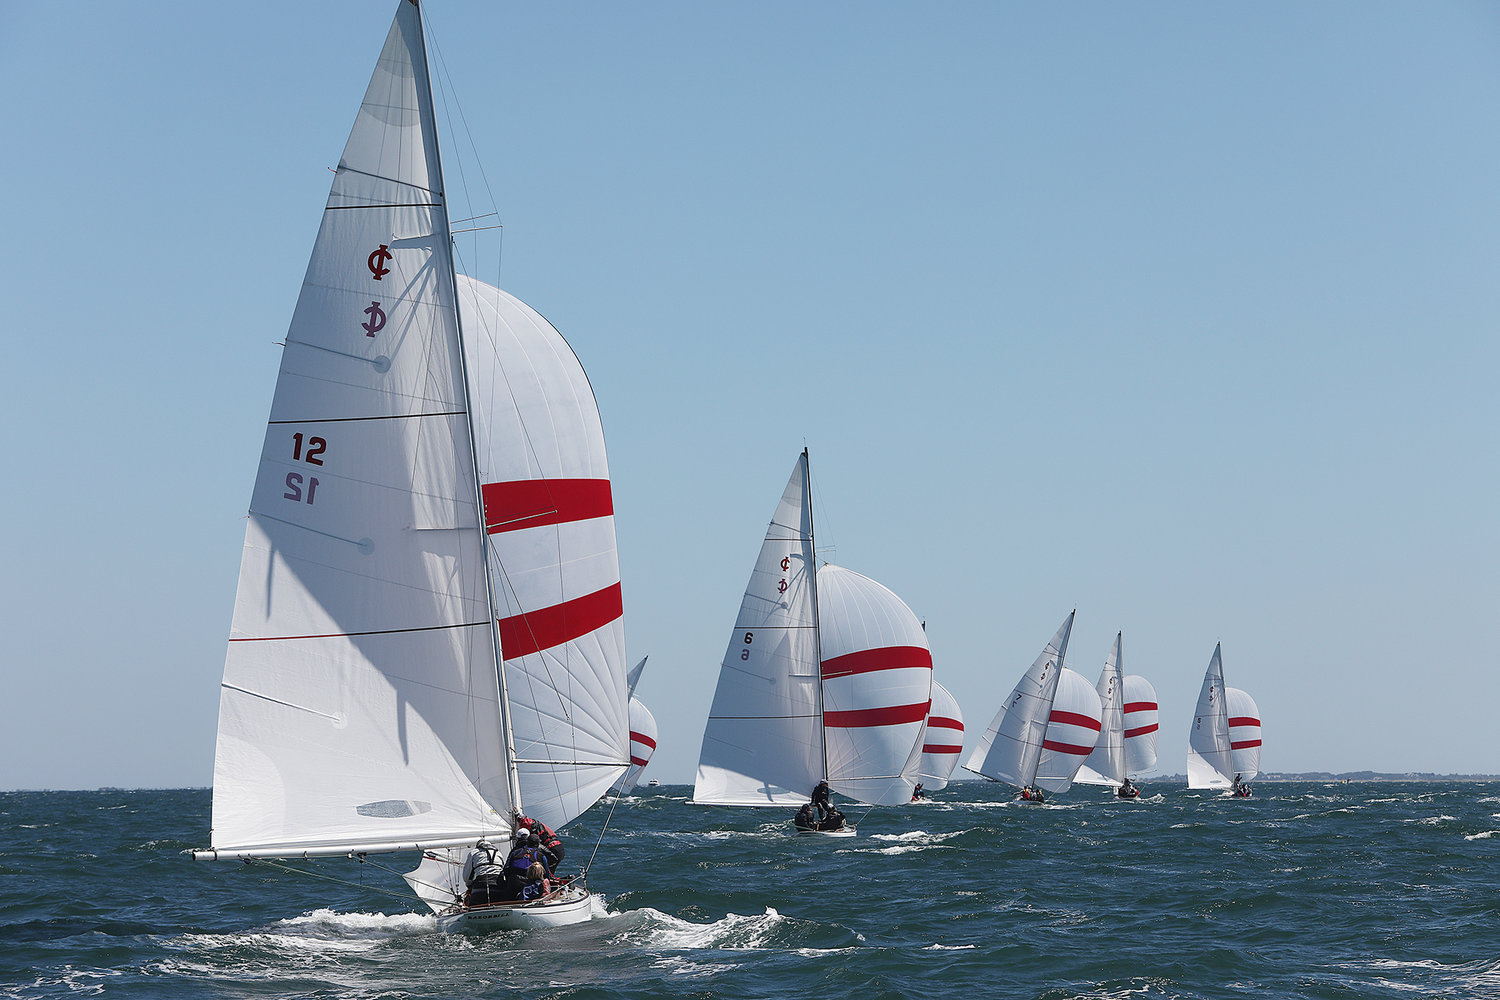 AUGUST 18, 2022 -- Nantucket Race Week. Day 6. Boats head downwind with spinnakers during the International One Design Celebrity Invitational in Nantucket Sound on Thursday. Photo by Ray K. Saunders